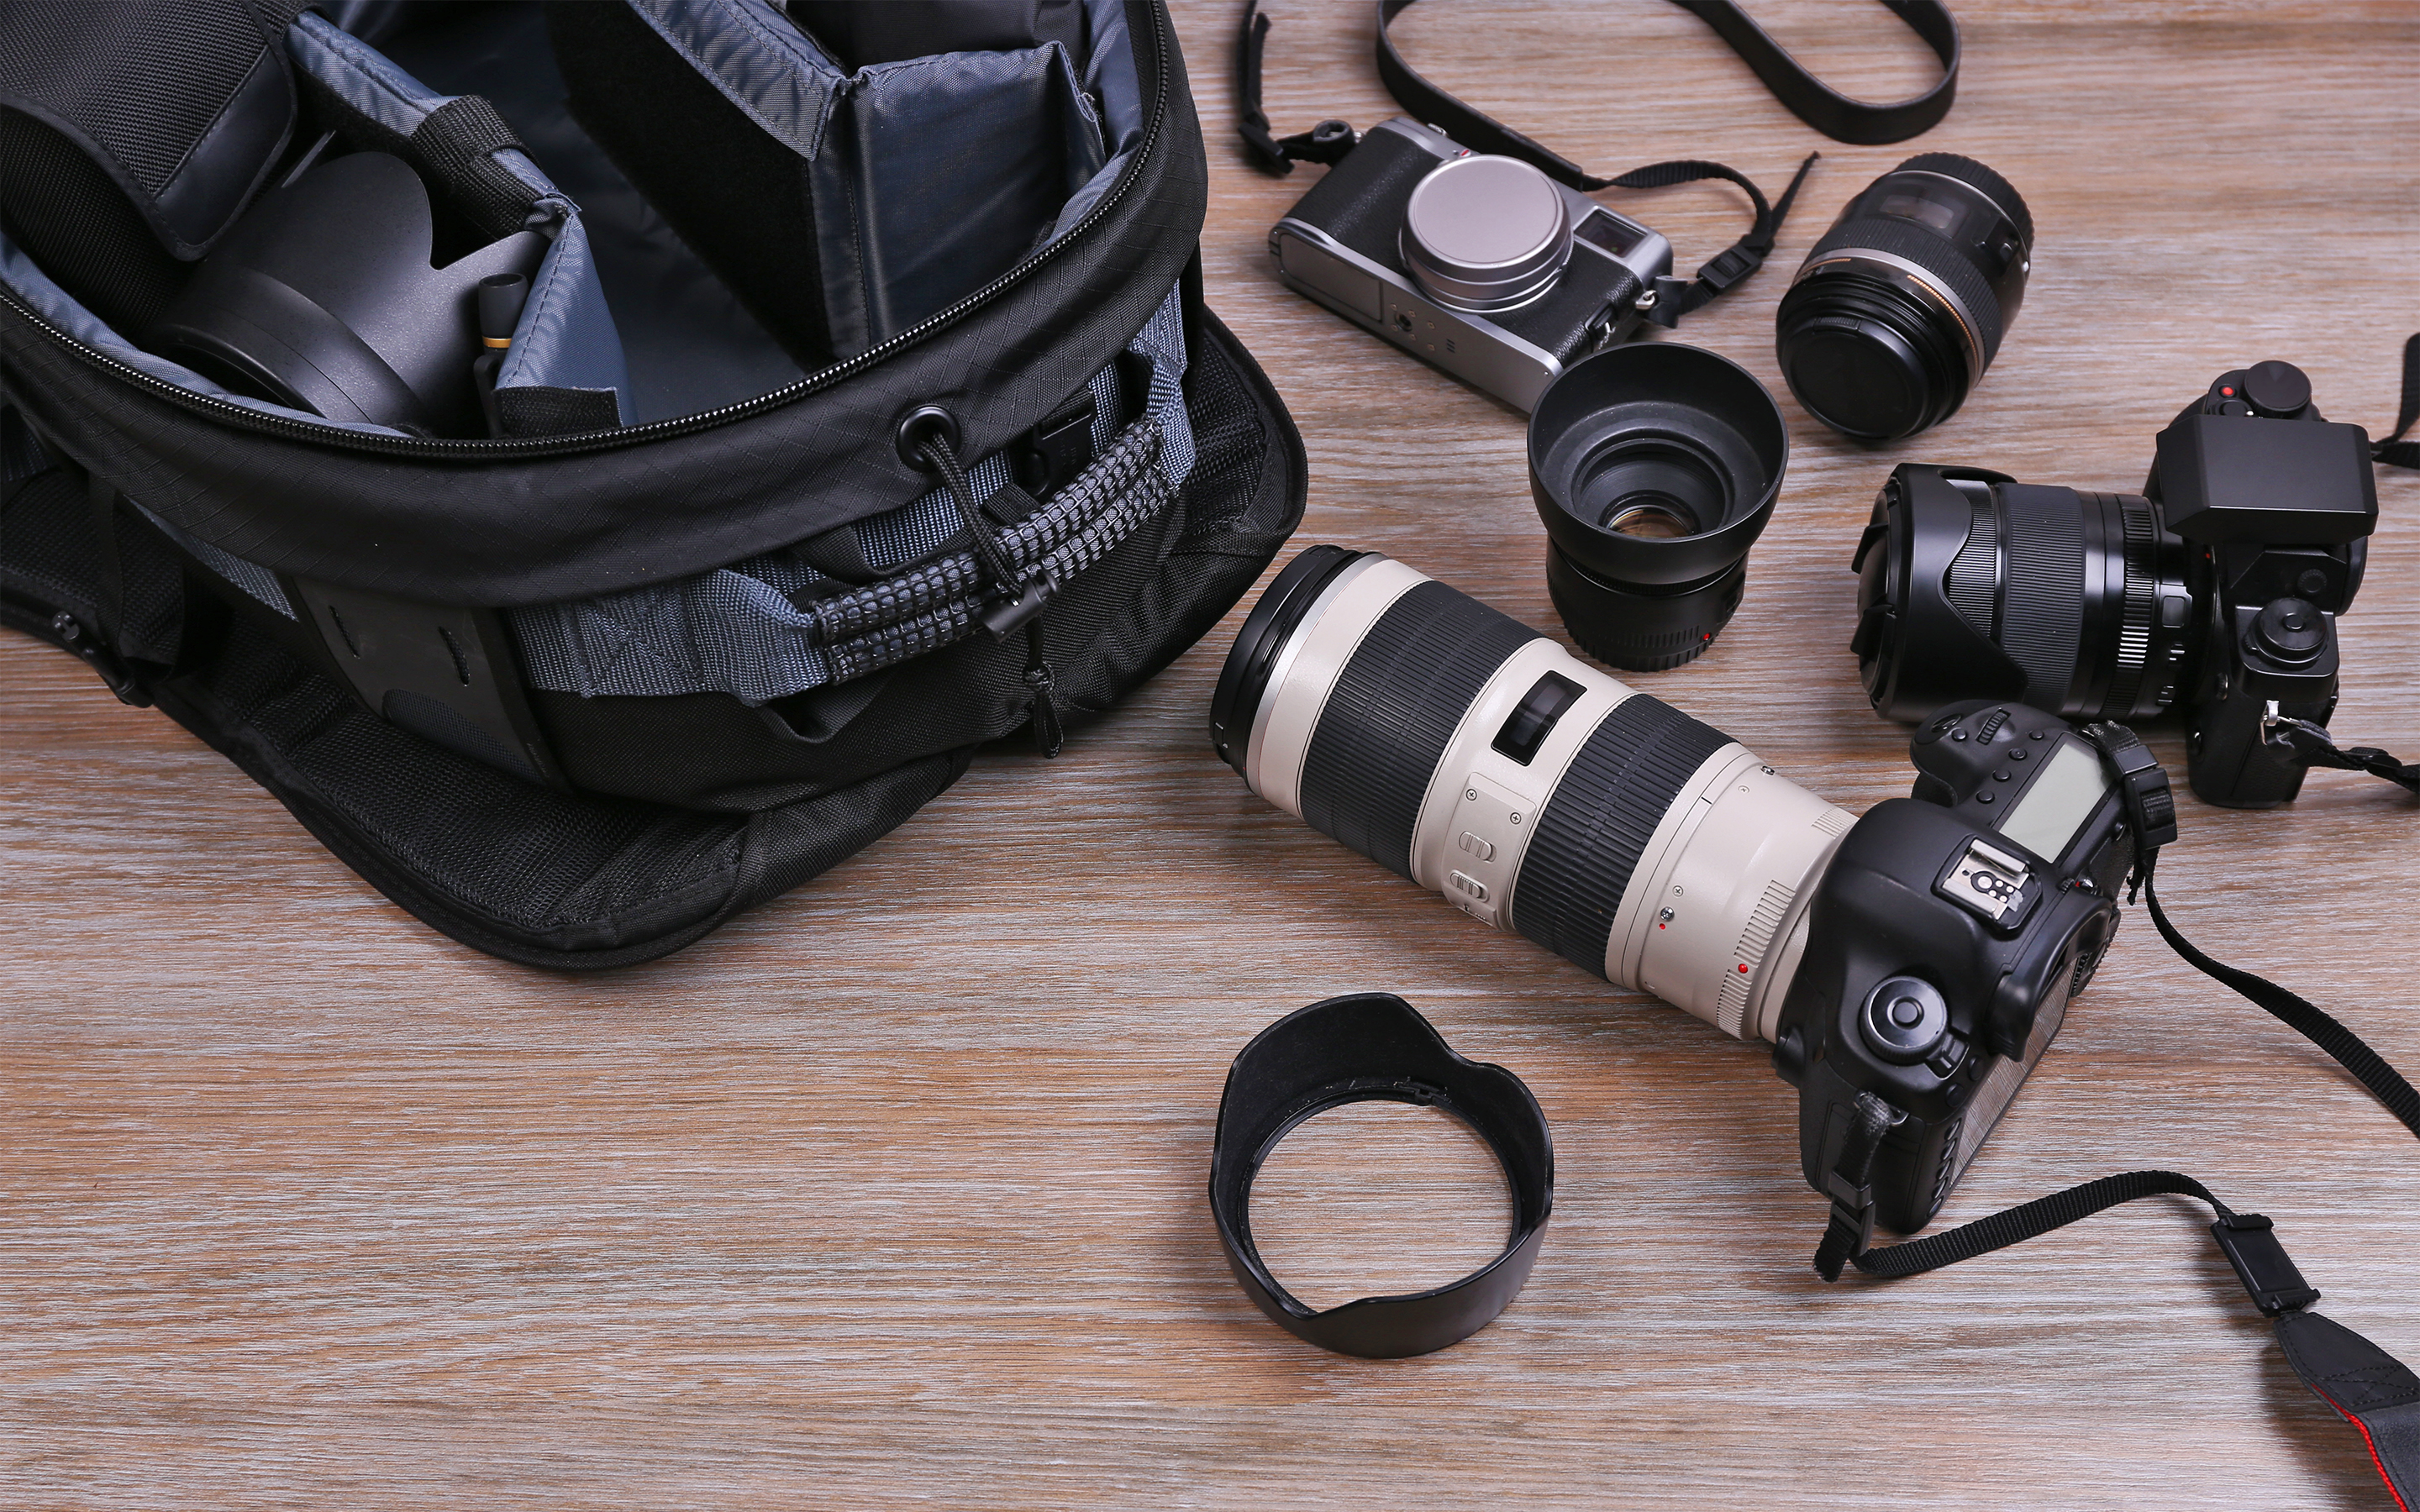 DIY Tips and Tricks for Storing Video Gear